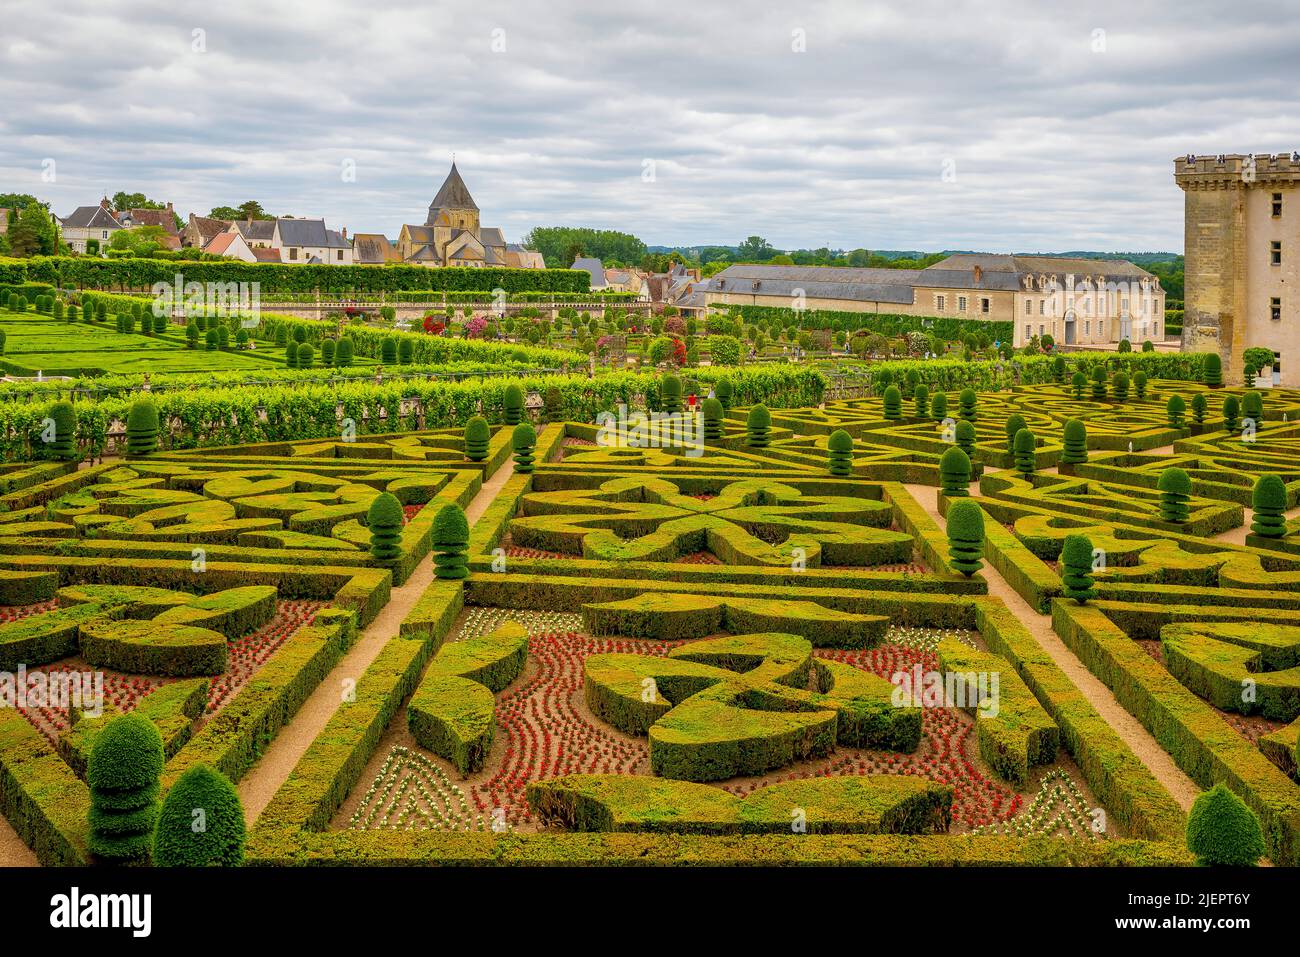 The Château de Villandry is a wonderful country residence located in Villandry, in the Indre-et-Loire department of France. The famous Renaissance gar Stock Photo